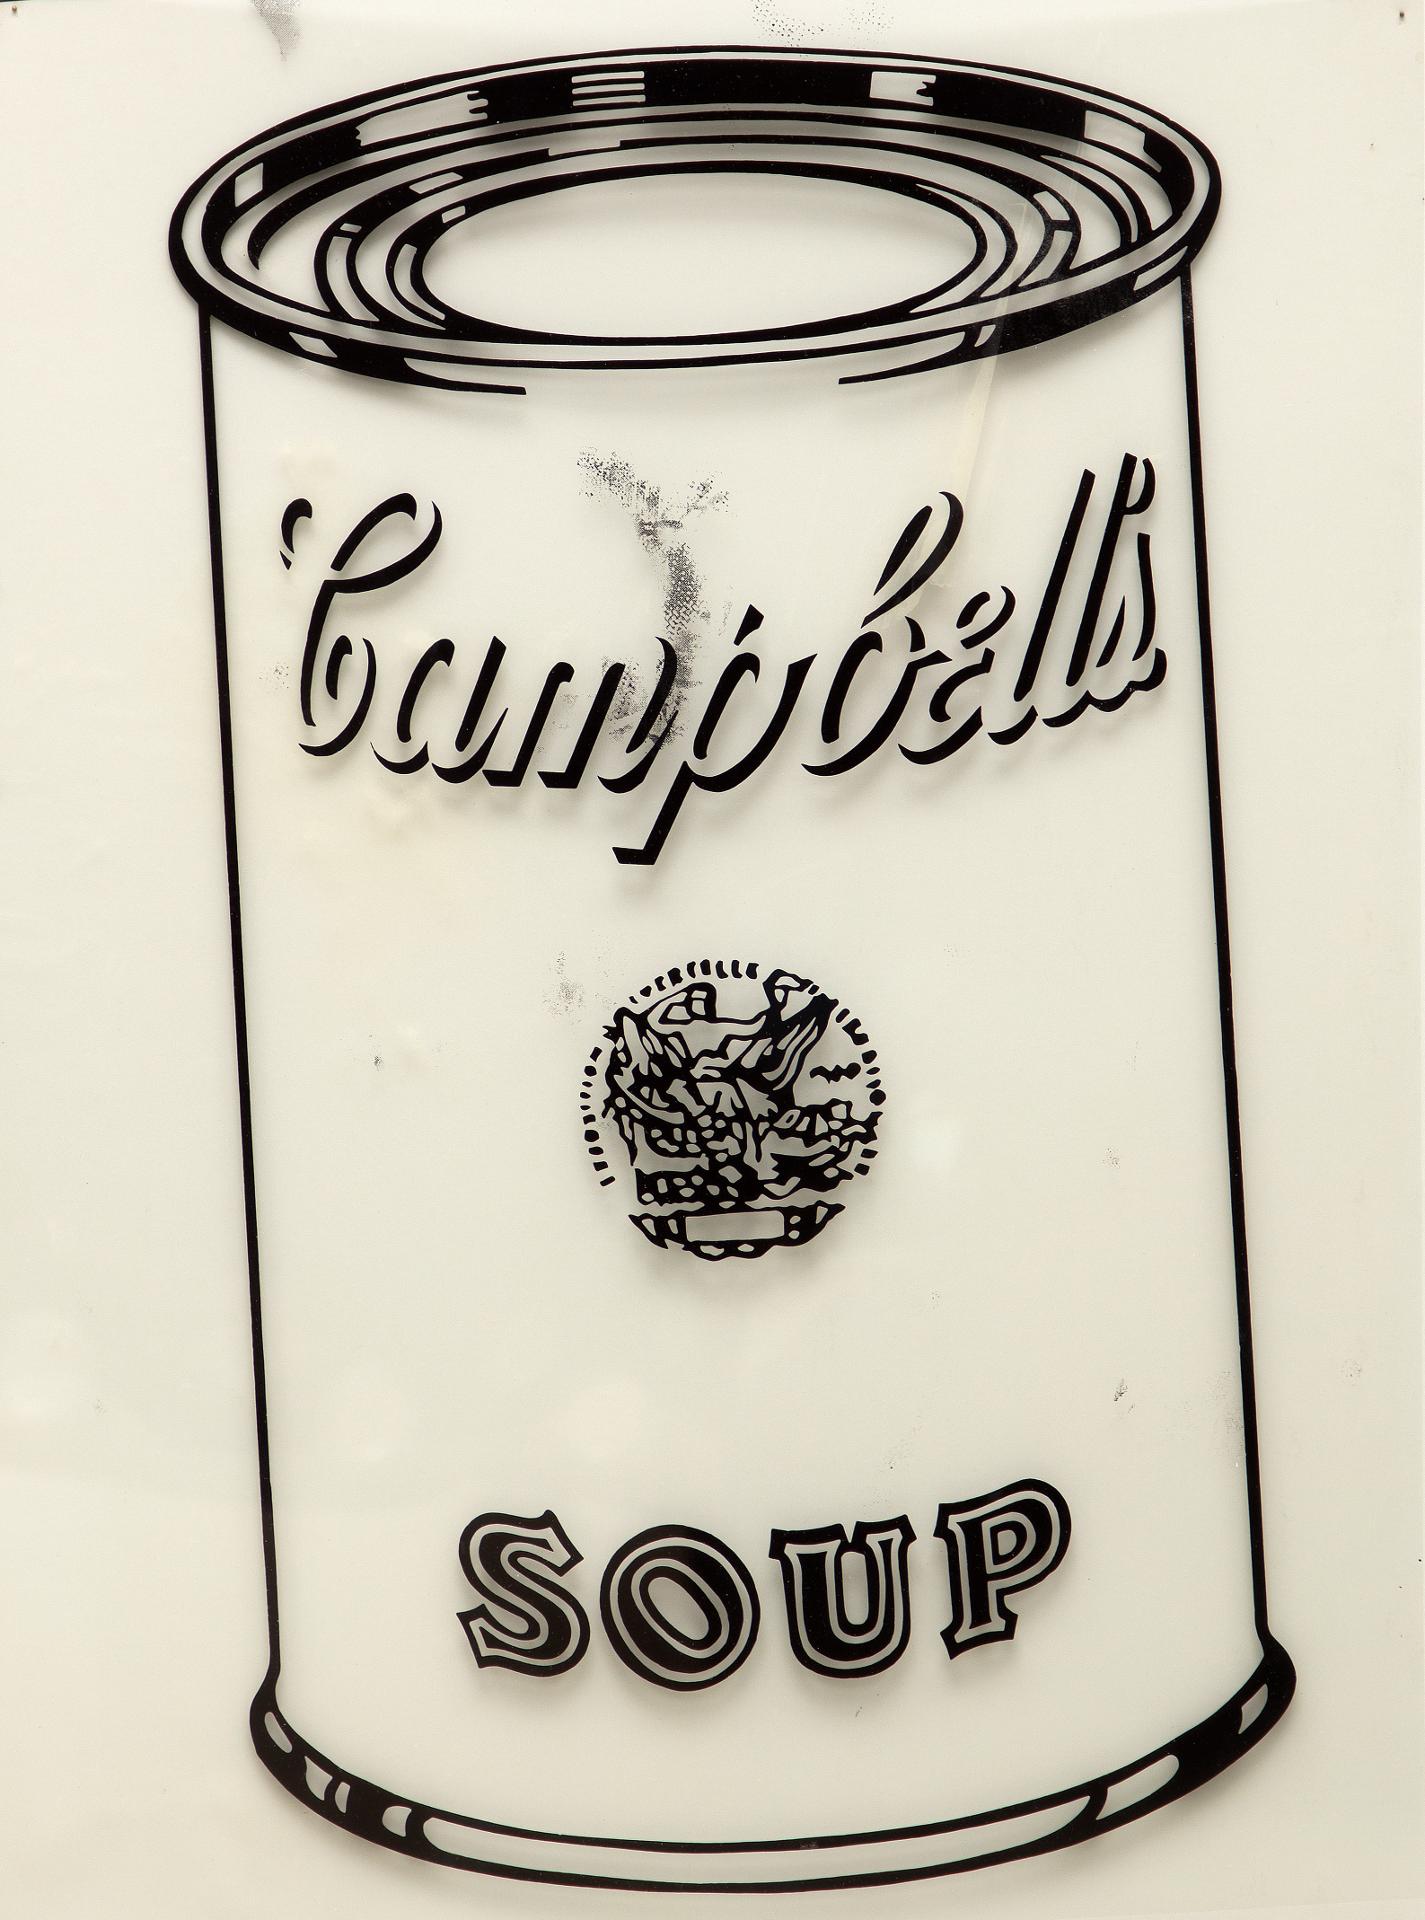 Andy Warhol (1928-1987) - Campbell's Soup Can, n.d.